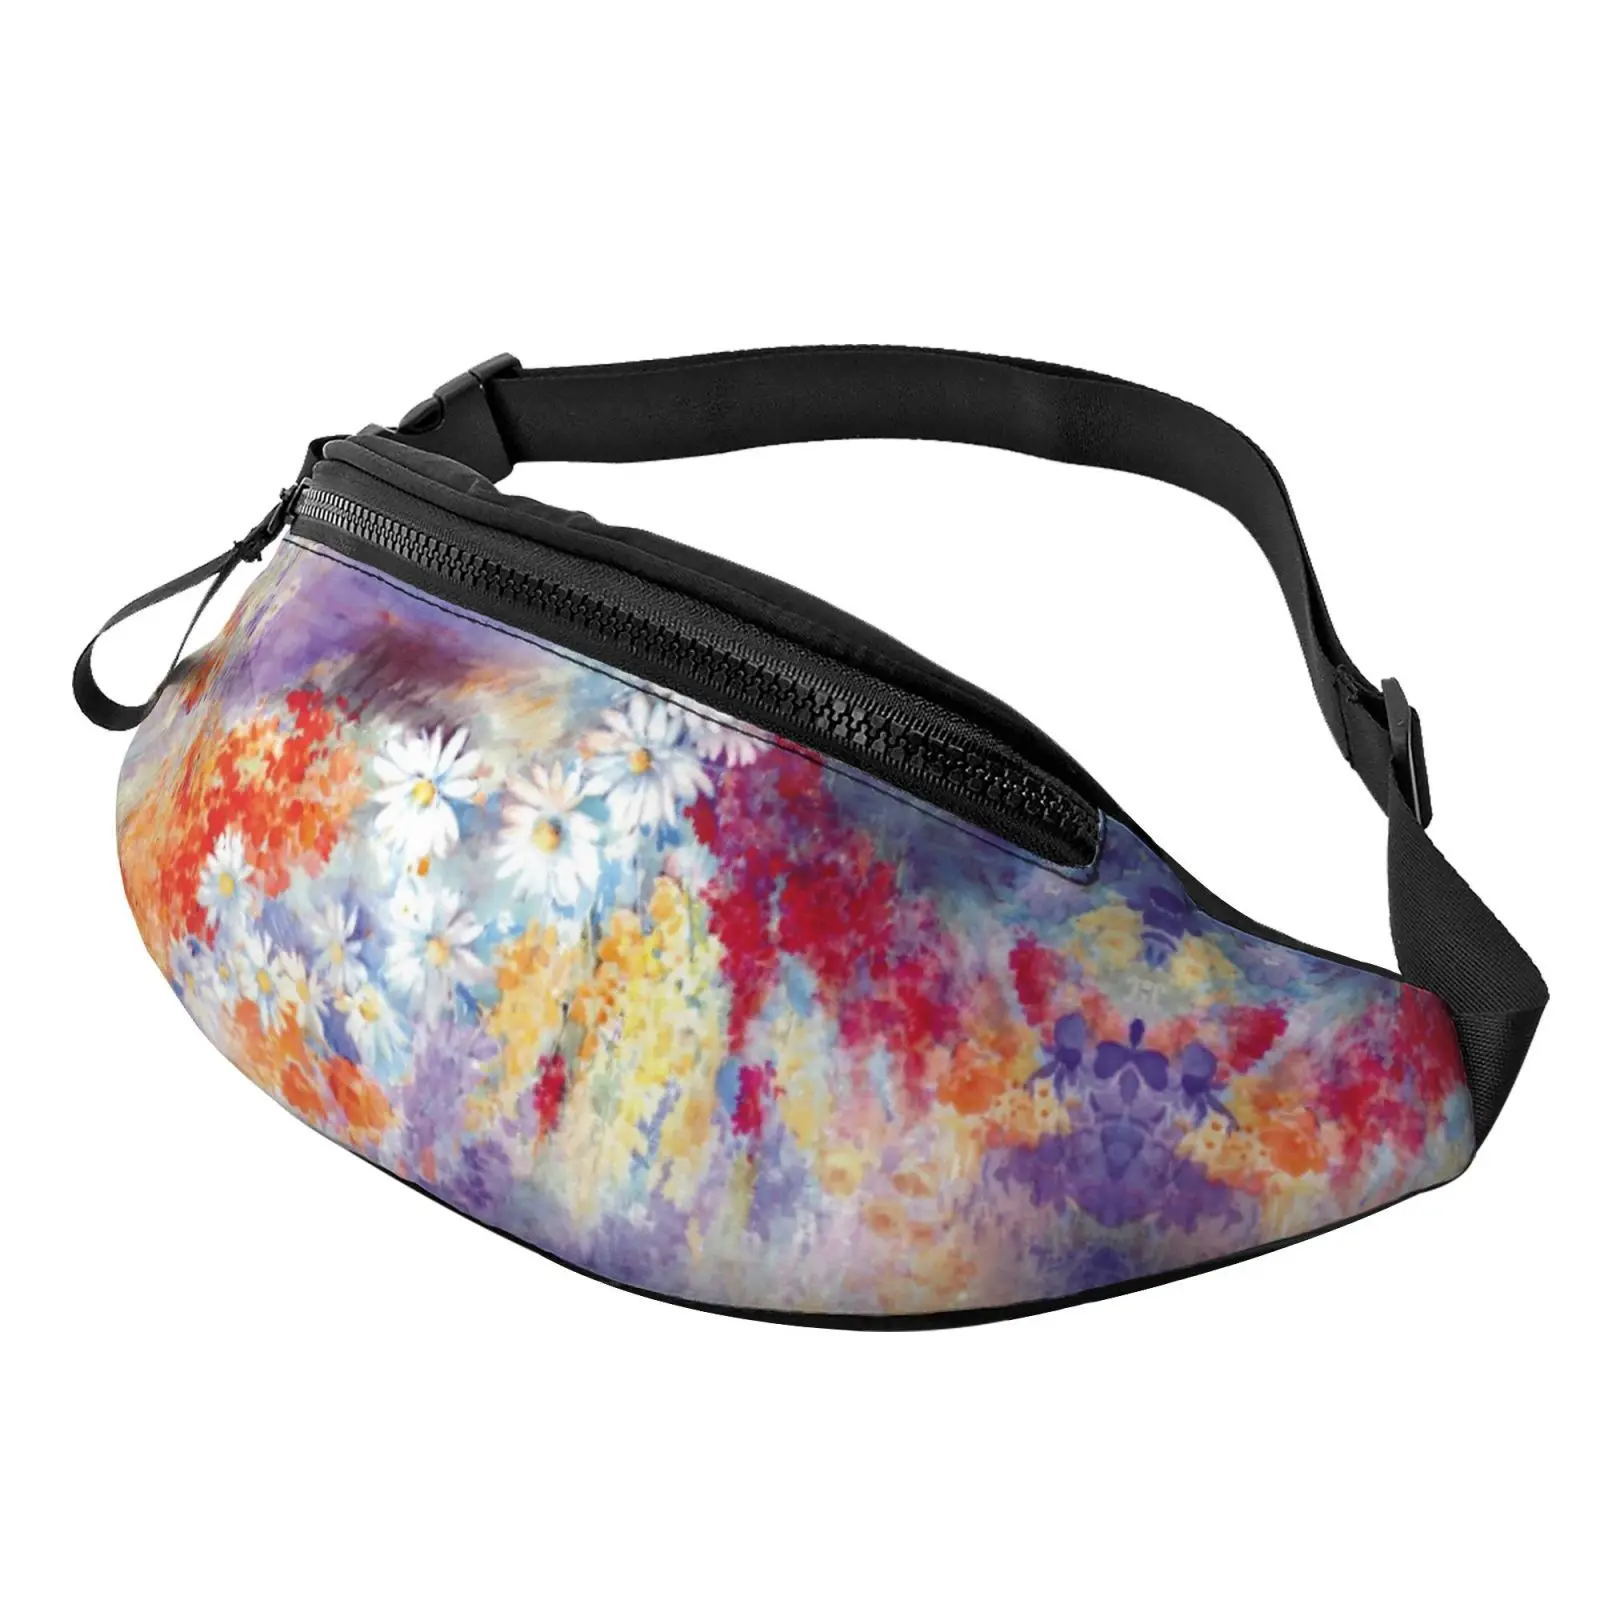 

Oil Painting Daisy Waist Bag Fanny Pack School Pack Bags for Women Men Young Polyester Casual Pack with Zipper Outdoor Hiking